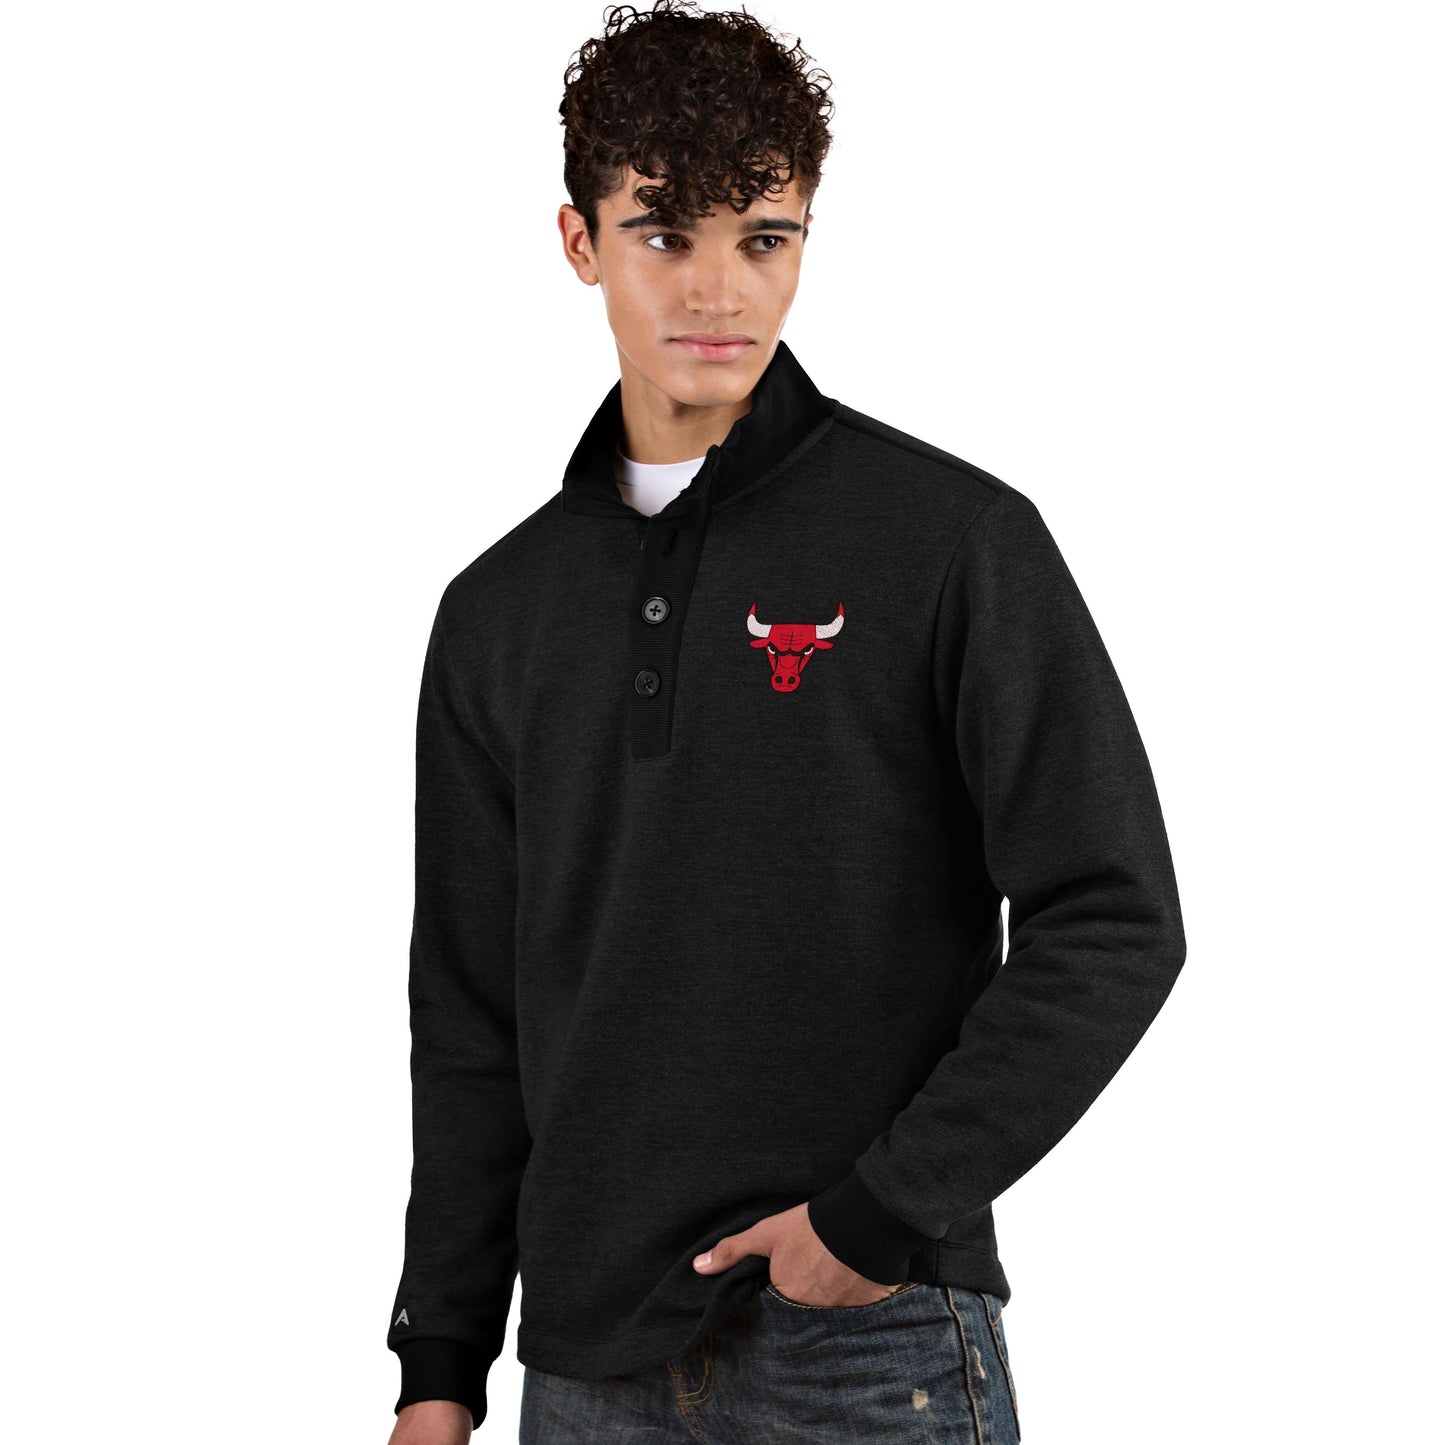 Mens Chicago Bulls Pivotal Sweater By Antigua